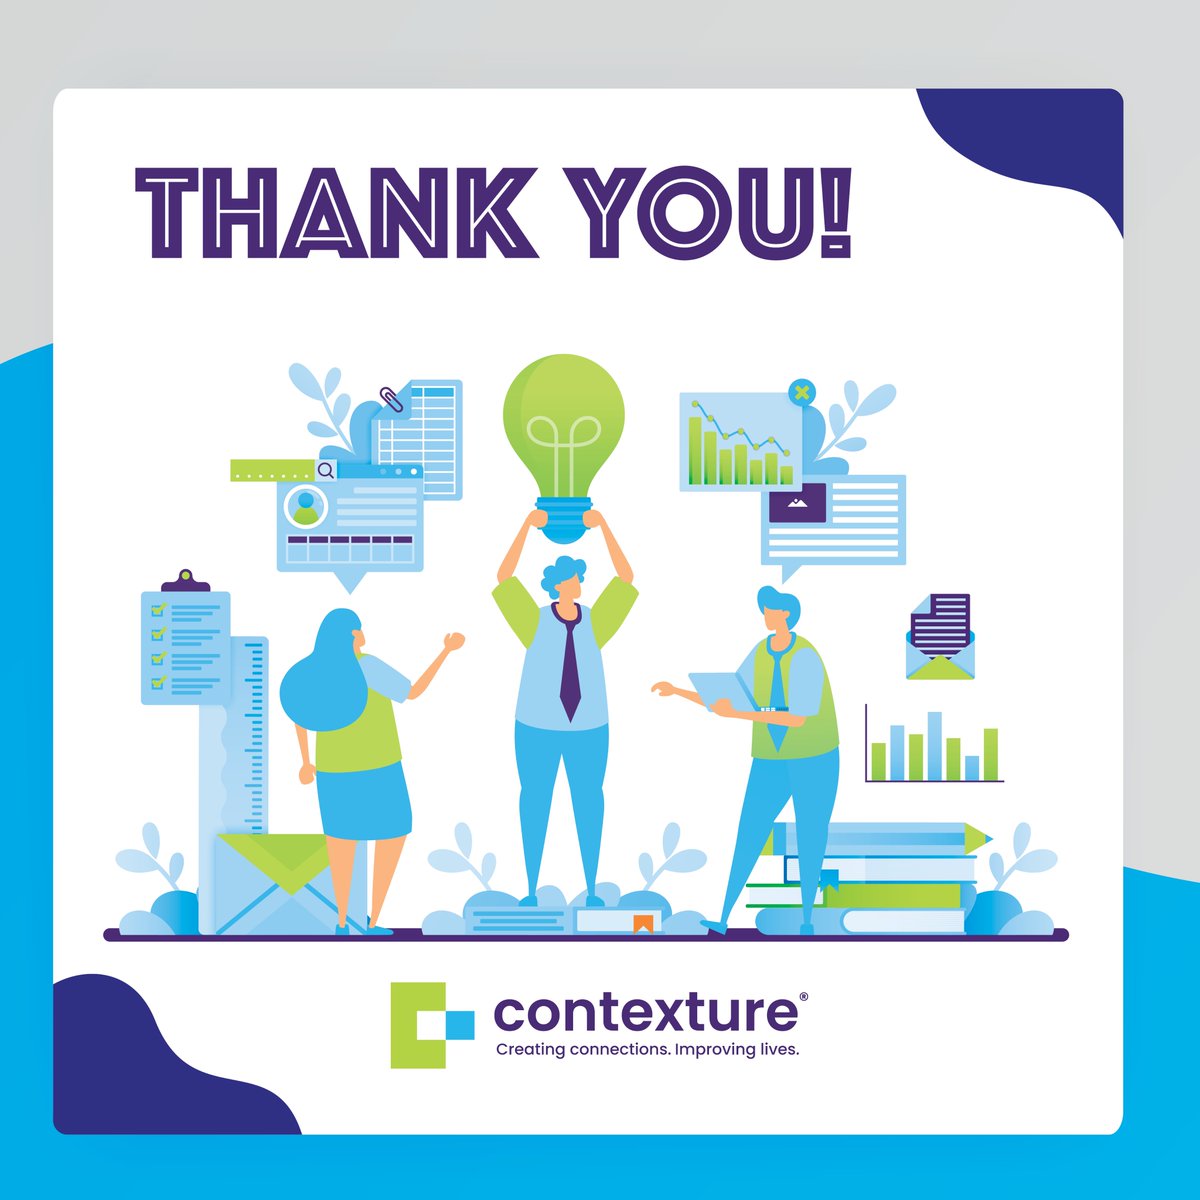 Today, we're taking a moment to recognize the heartbeat of Contexture – our incredible employees! From the problem-solvers and creative minds to the innovative leaders & consistent collaborators, your contributions make a difference at Contexture. #EmployeeAppreciationDay